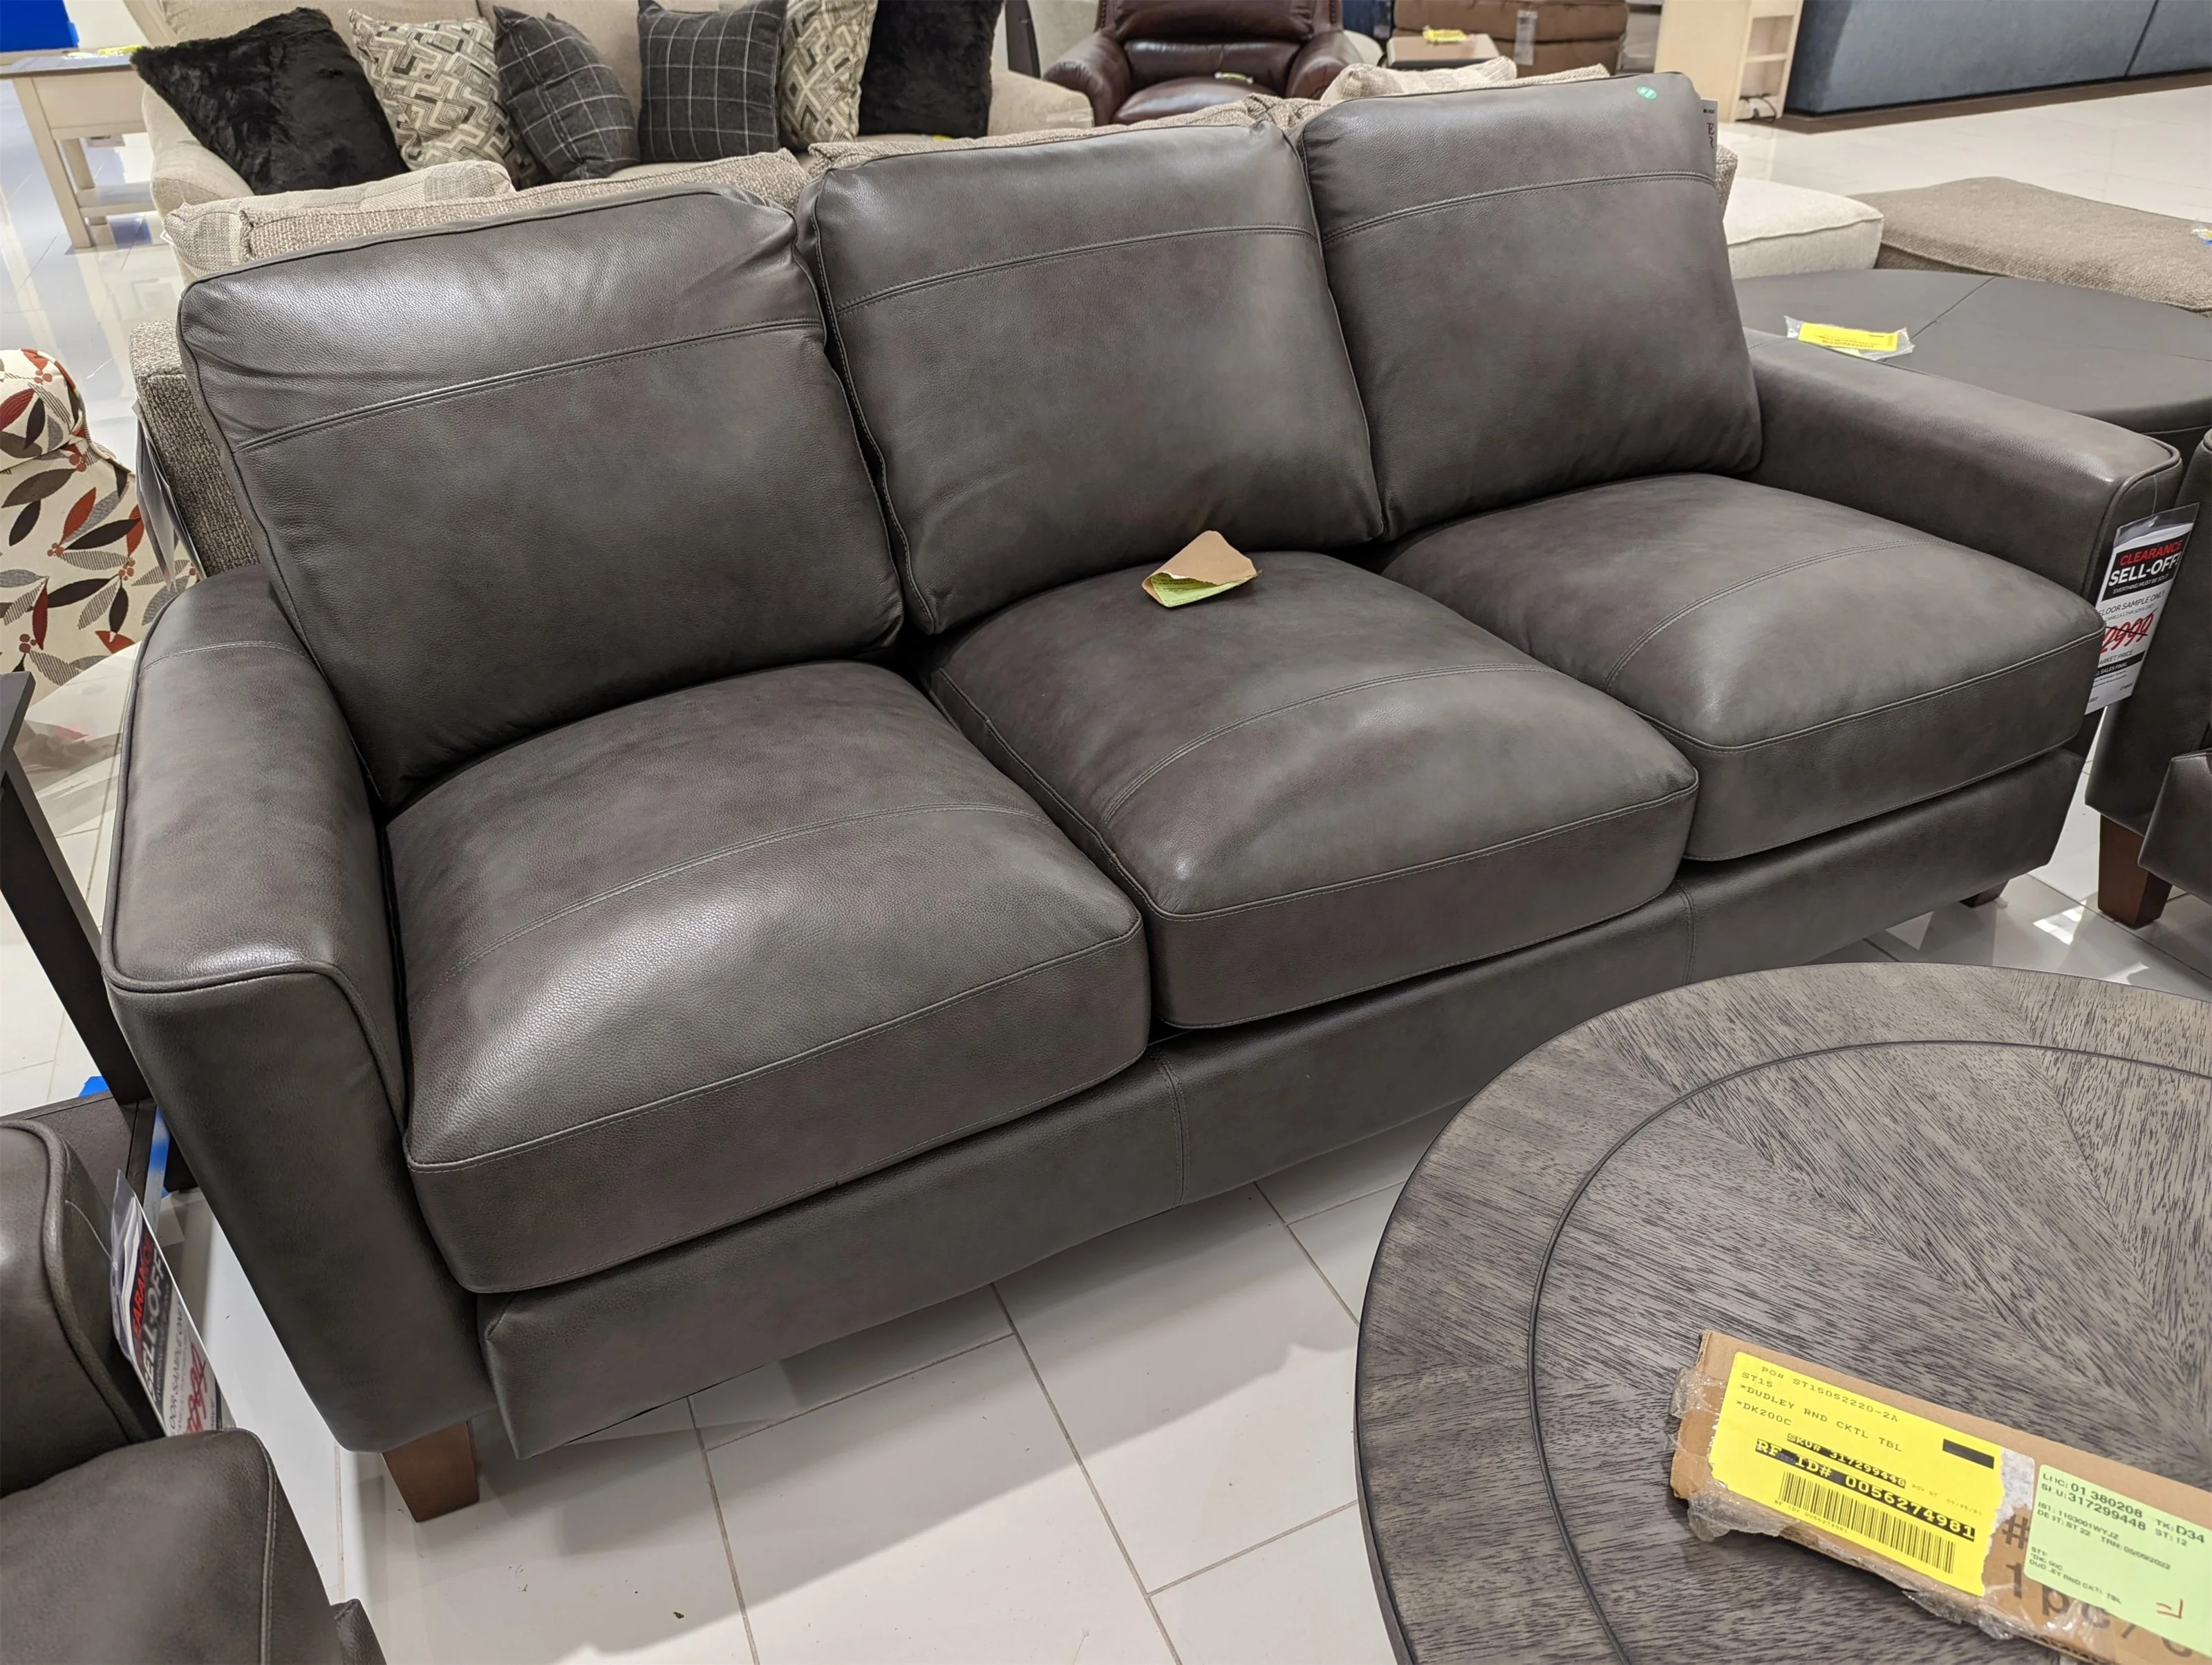 Clearance and Closeouts Fairfield Commons Mall 00048 Last One Top Grain  Leather Sofa! Wow!!! 100 Percent Leather Sofa at a deep Discount! | Morris  Home | Sofas